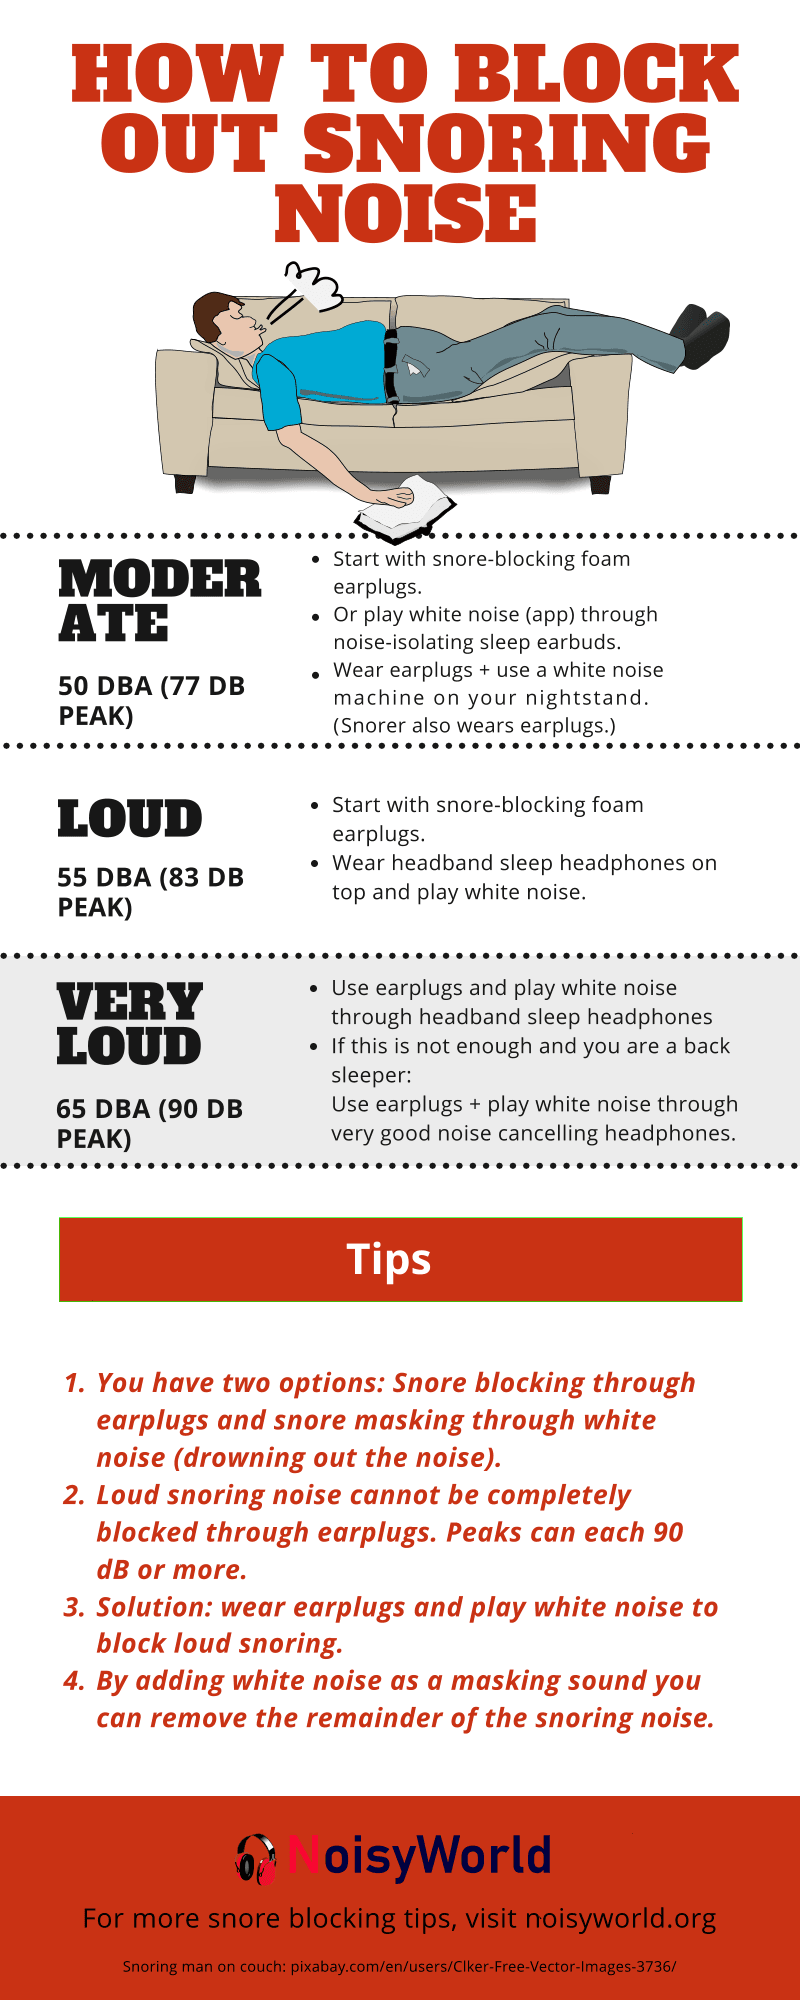 How to Block Out Snoring Noise - Infographic